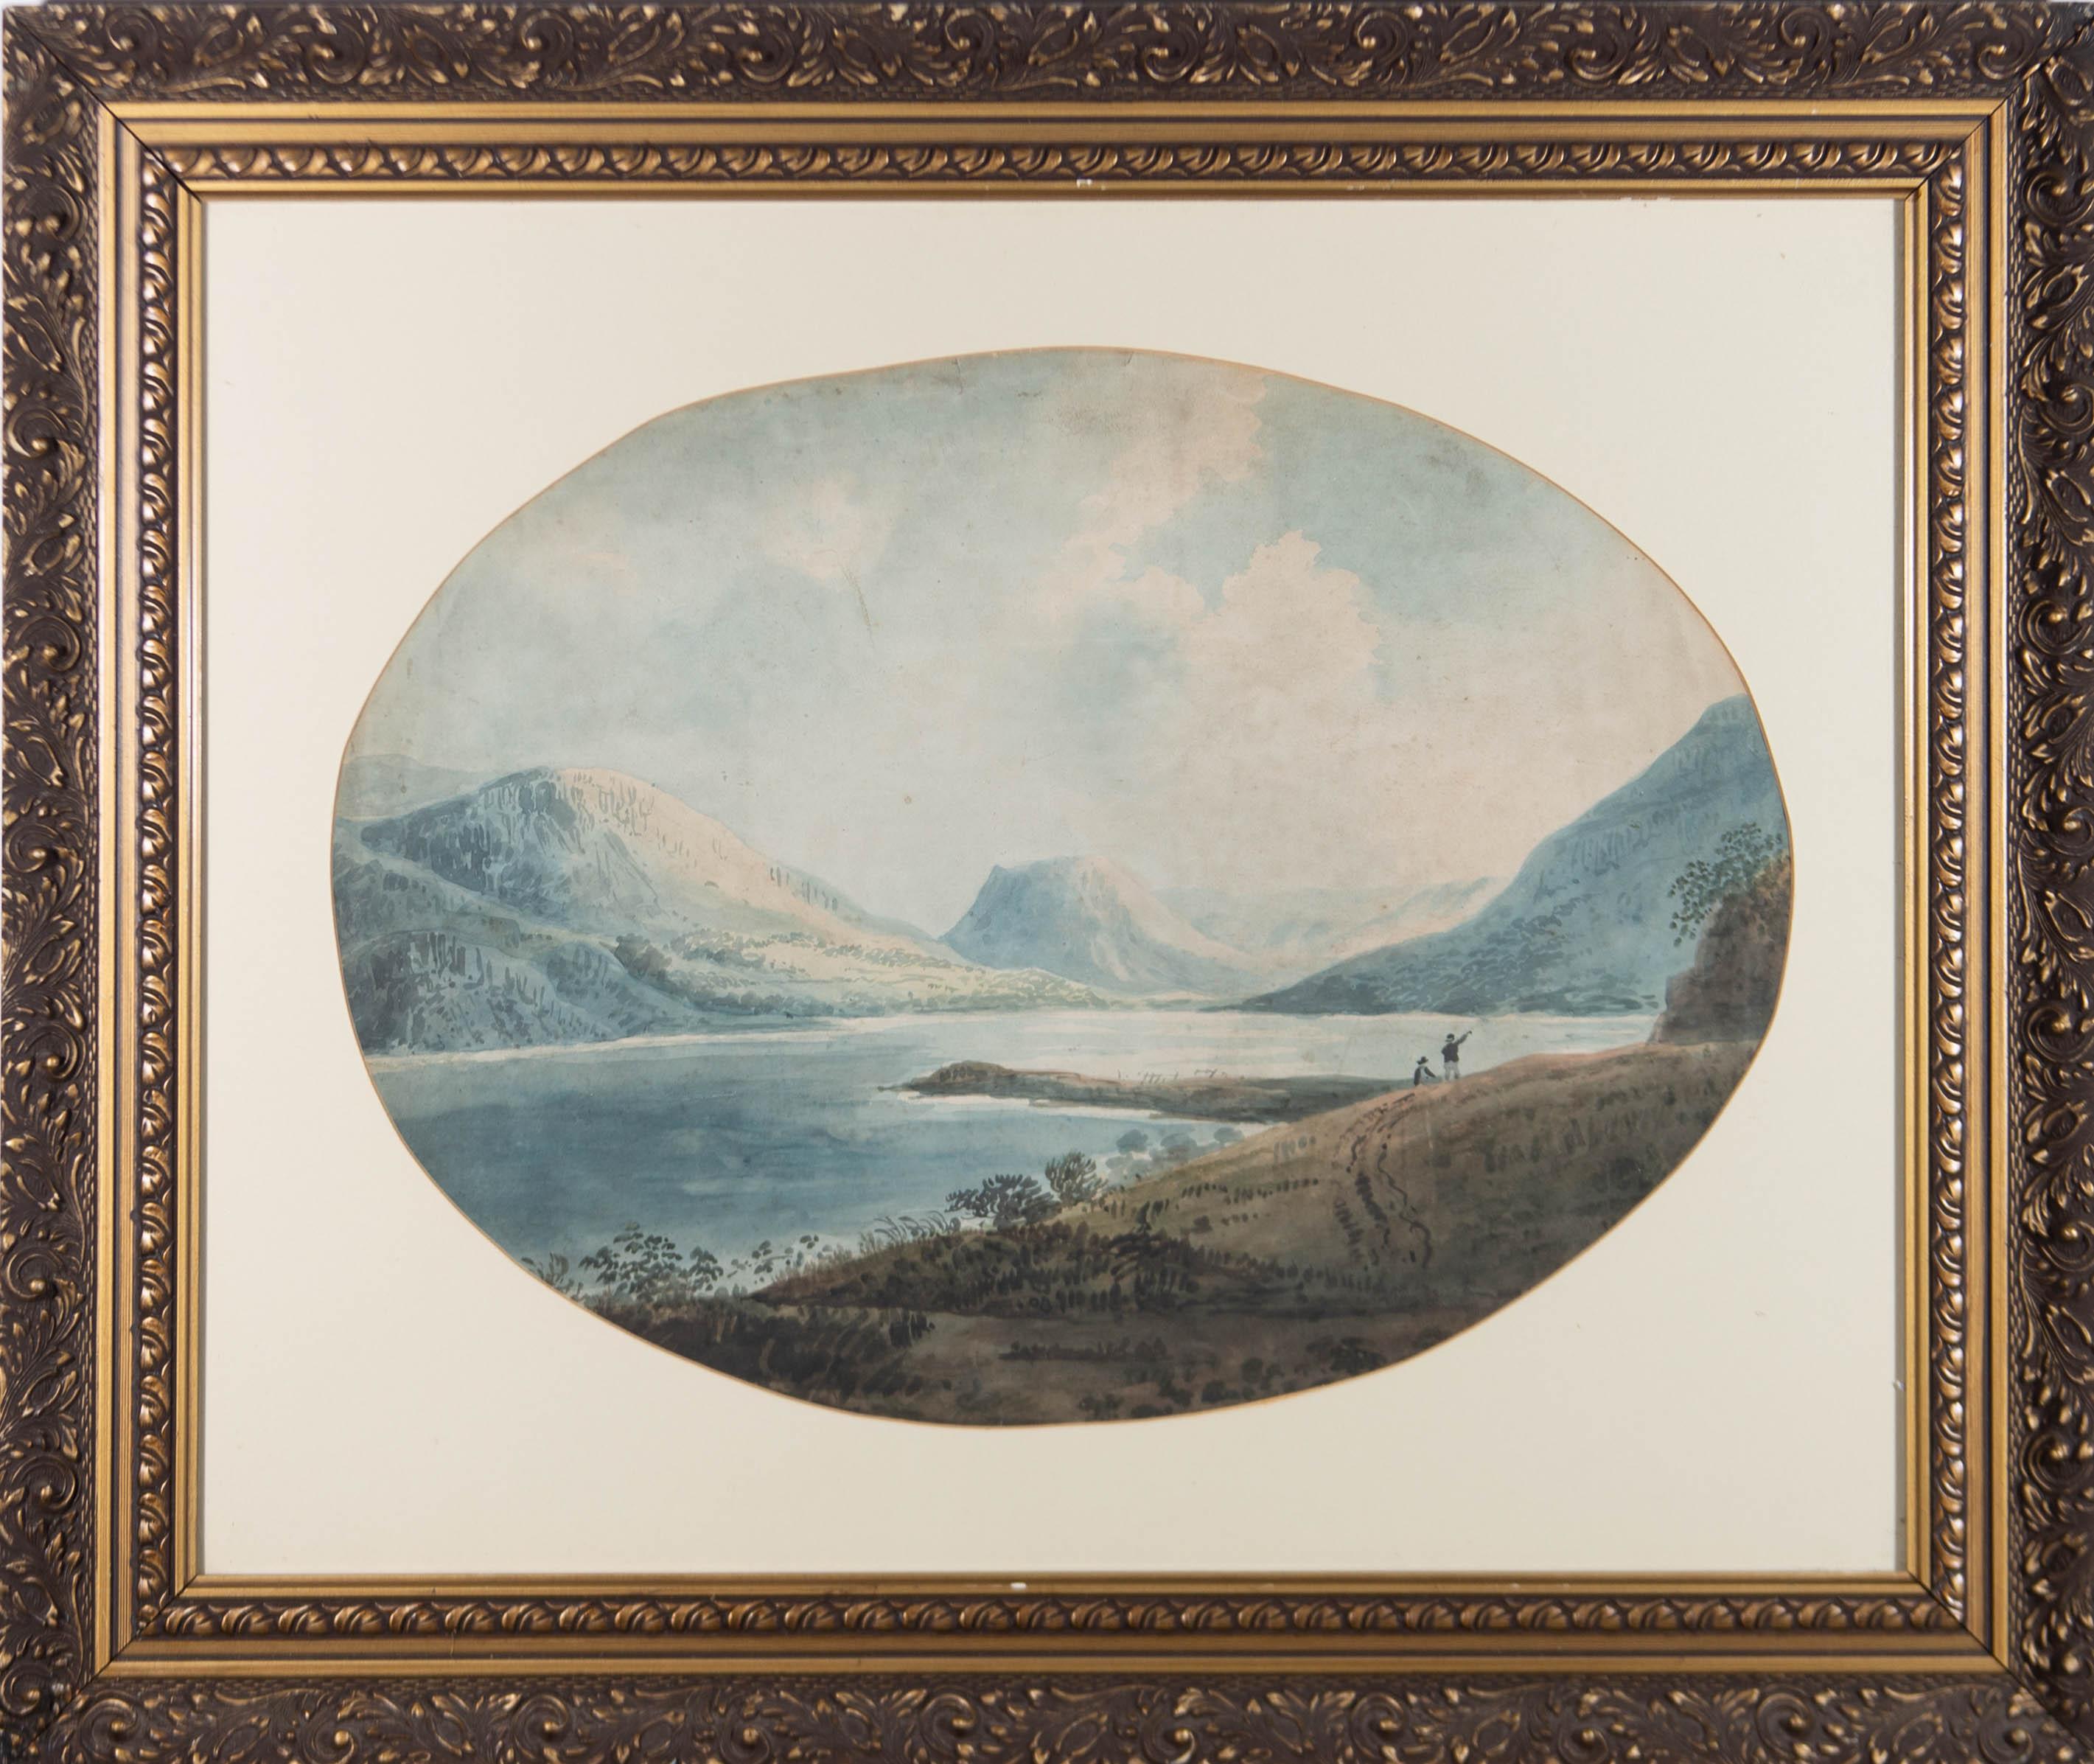 Unknown Landscape Art - Framed Early 19th Century Watercolour - Highland Lake Landscape